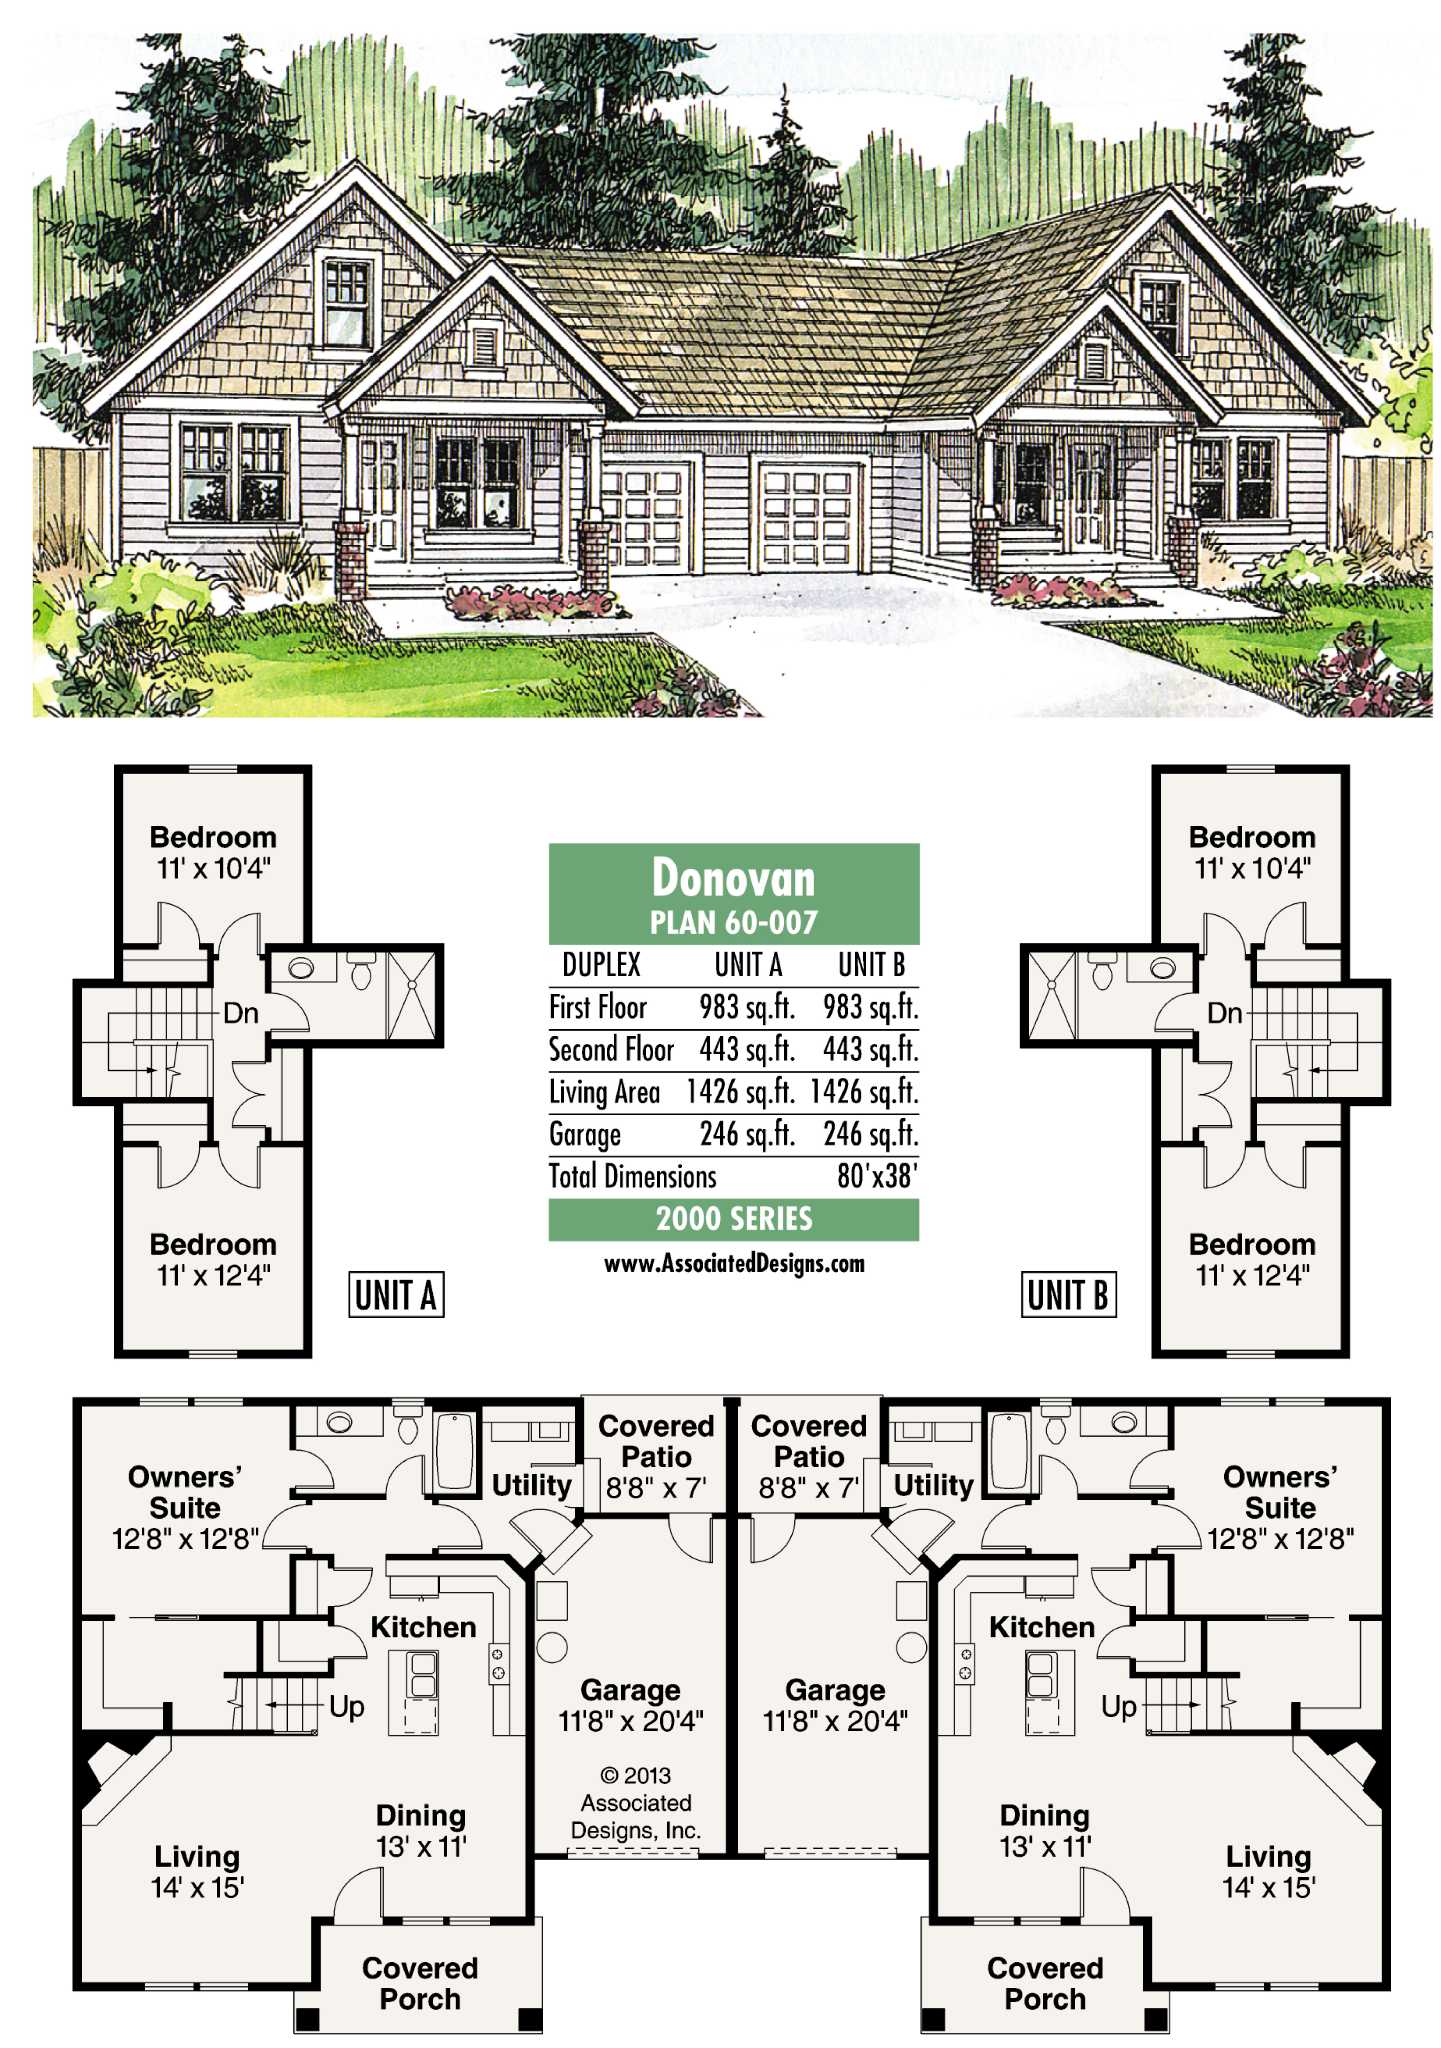 House plan drawing online - mzaercities